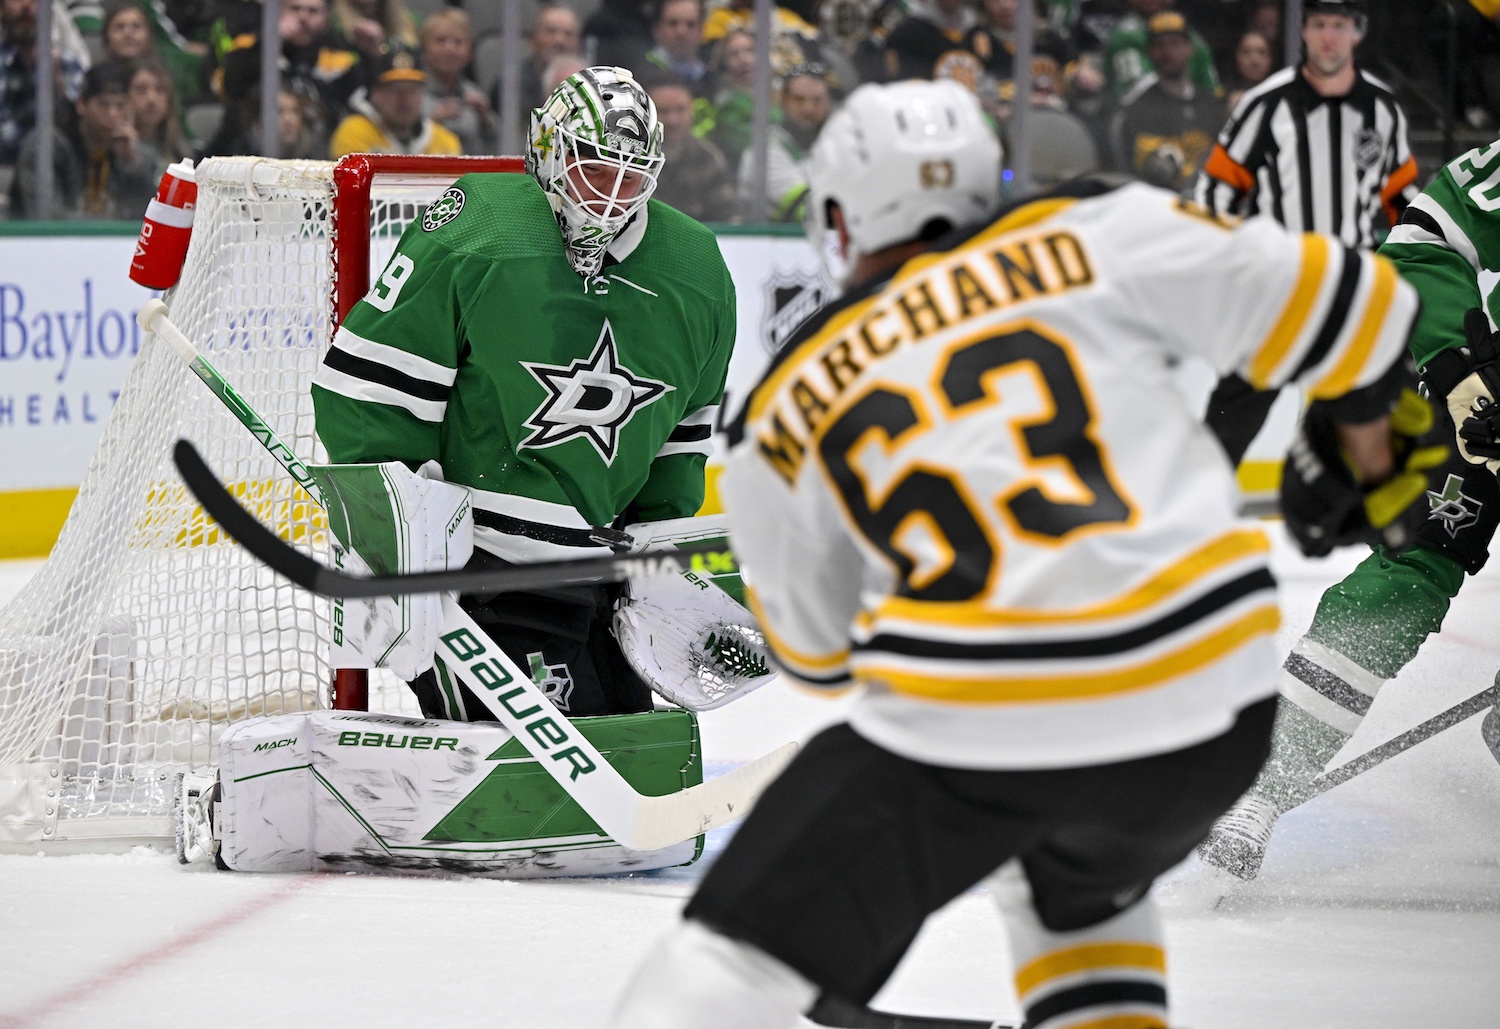 Feb 14, 2023; Dallas, Texas, USA; Dallas Stars goaltender Jake Oettinger (29) stops a shot by Boston Bruins left wing Brad Marchand (63) during the first period at the American Airlines Center. Mandatory Credit: Jerome Miron-USA TODAY Sports